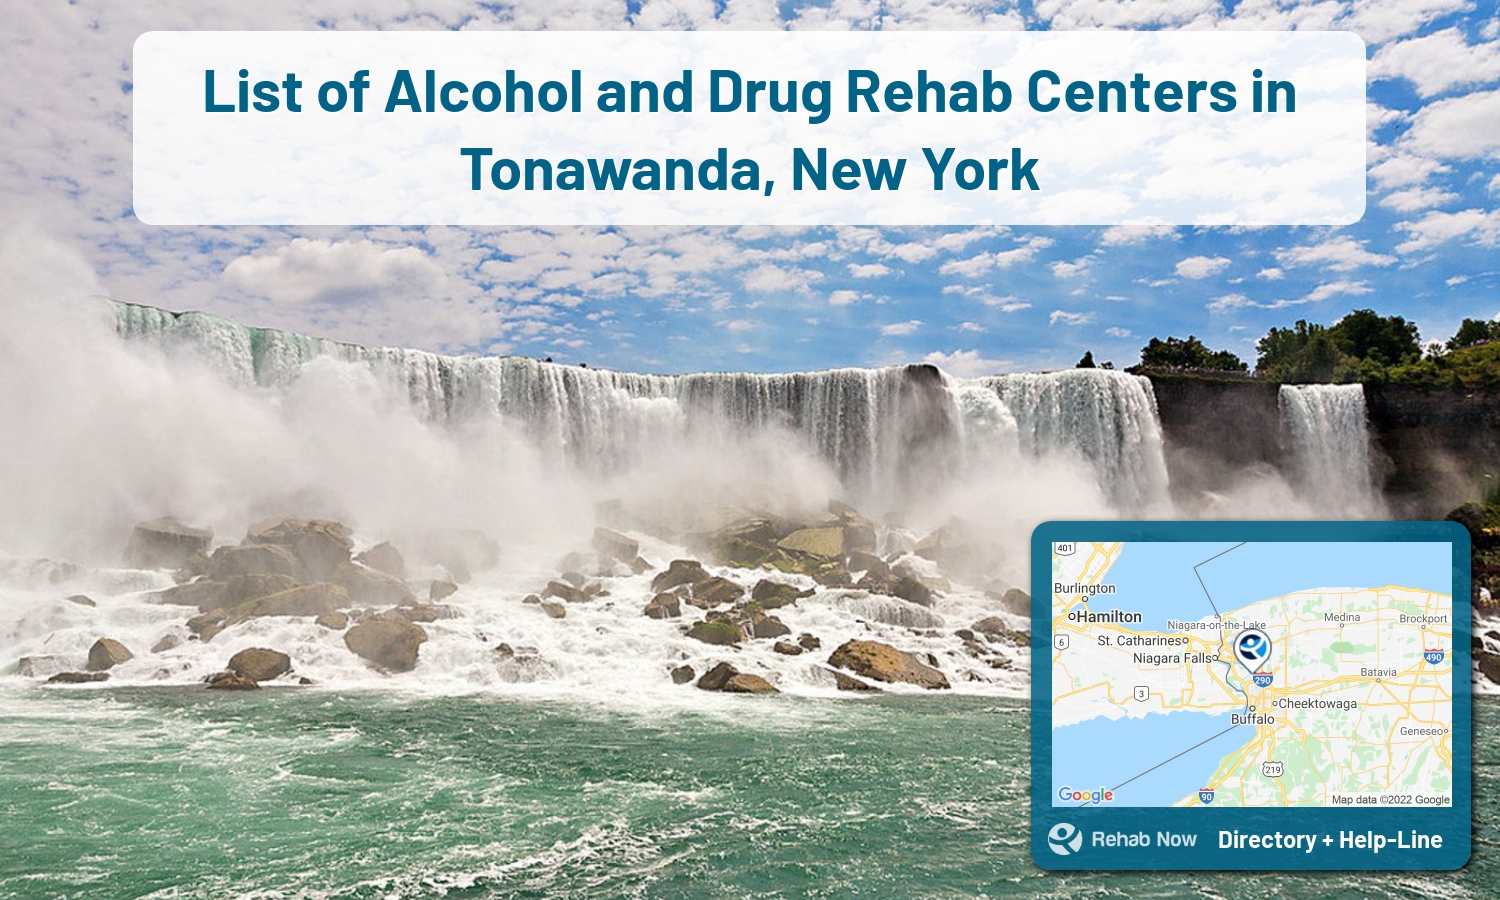 Let our expert counselors help find the best addiction treatment in Tonawanda, New York now with a free call to our hotline.